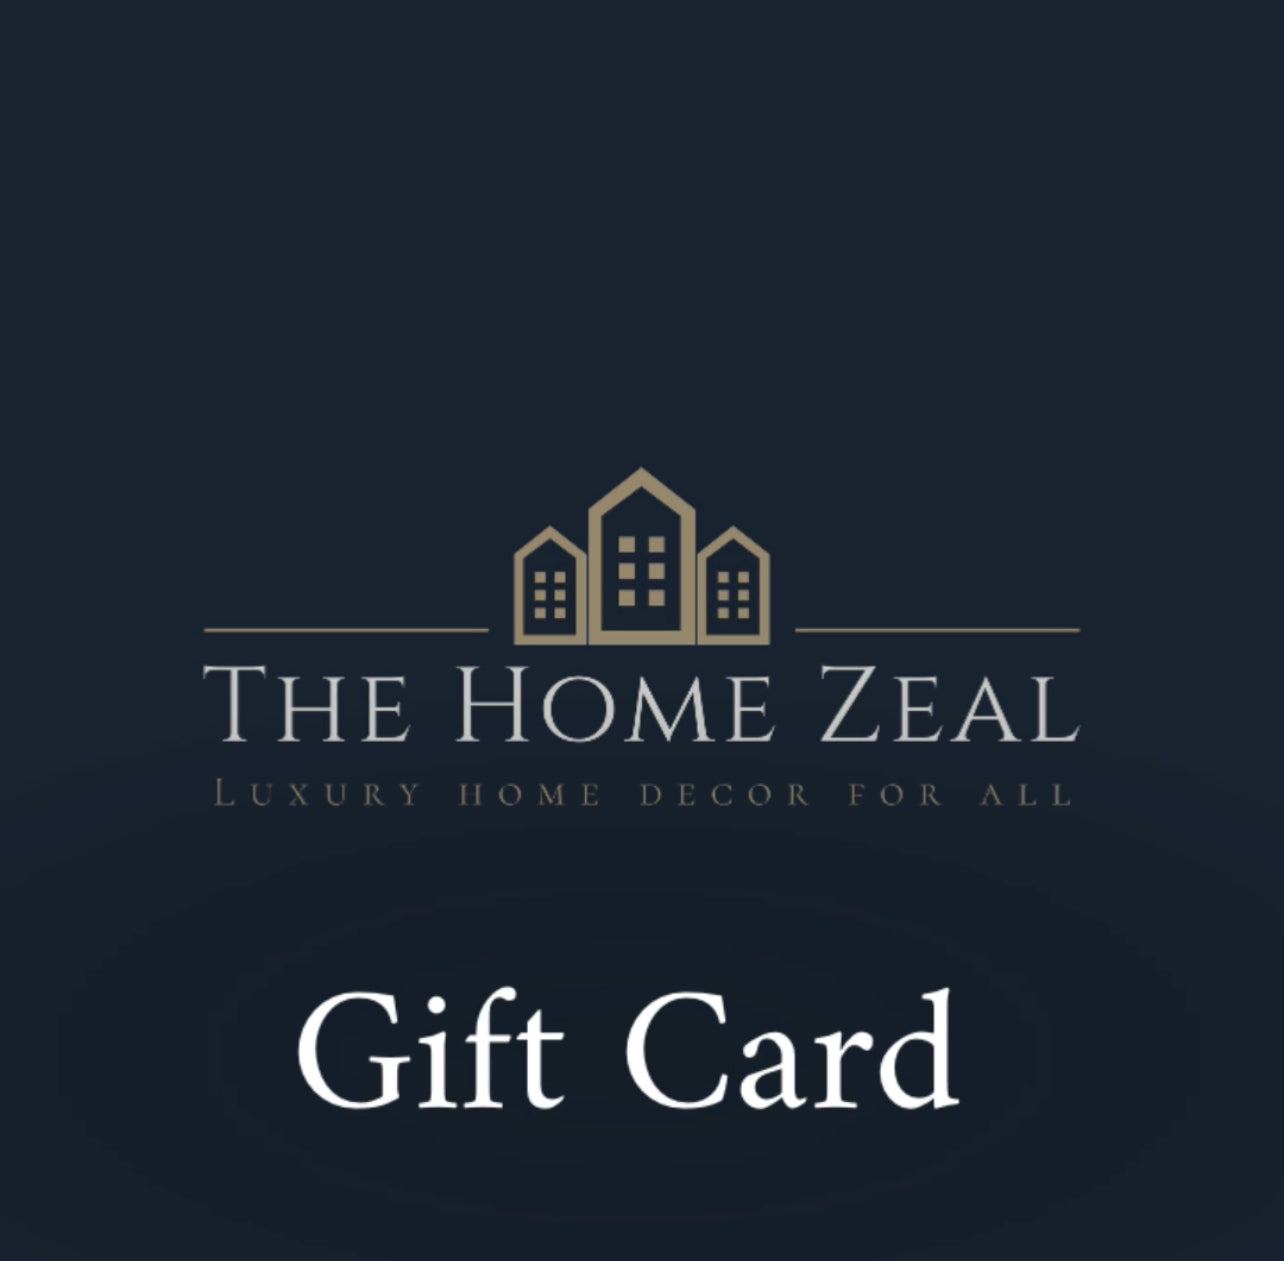 The Home Zeal Gift Card